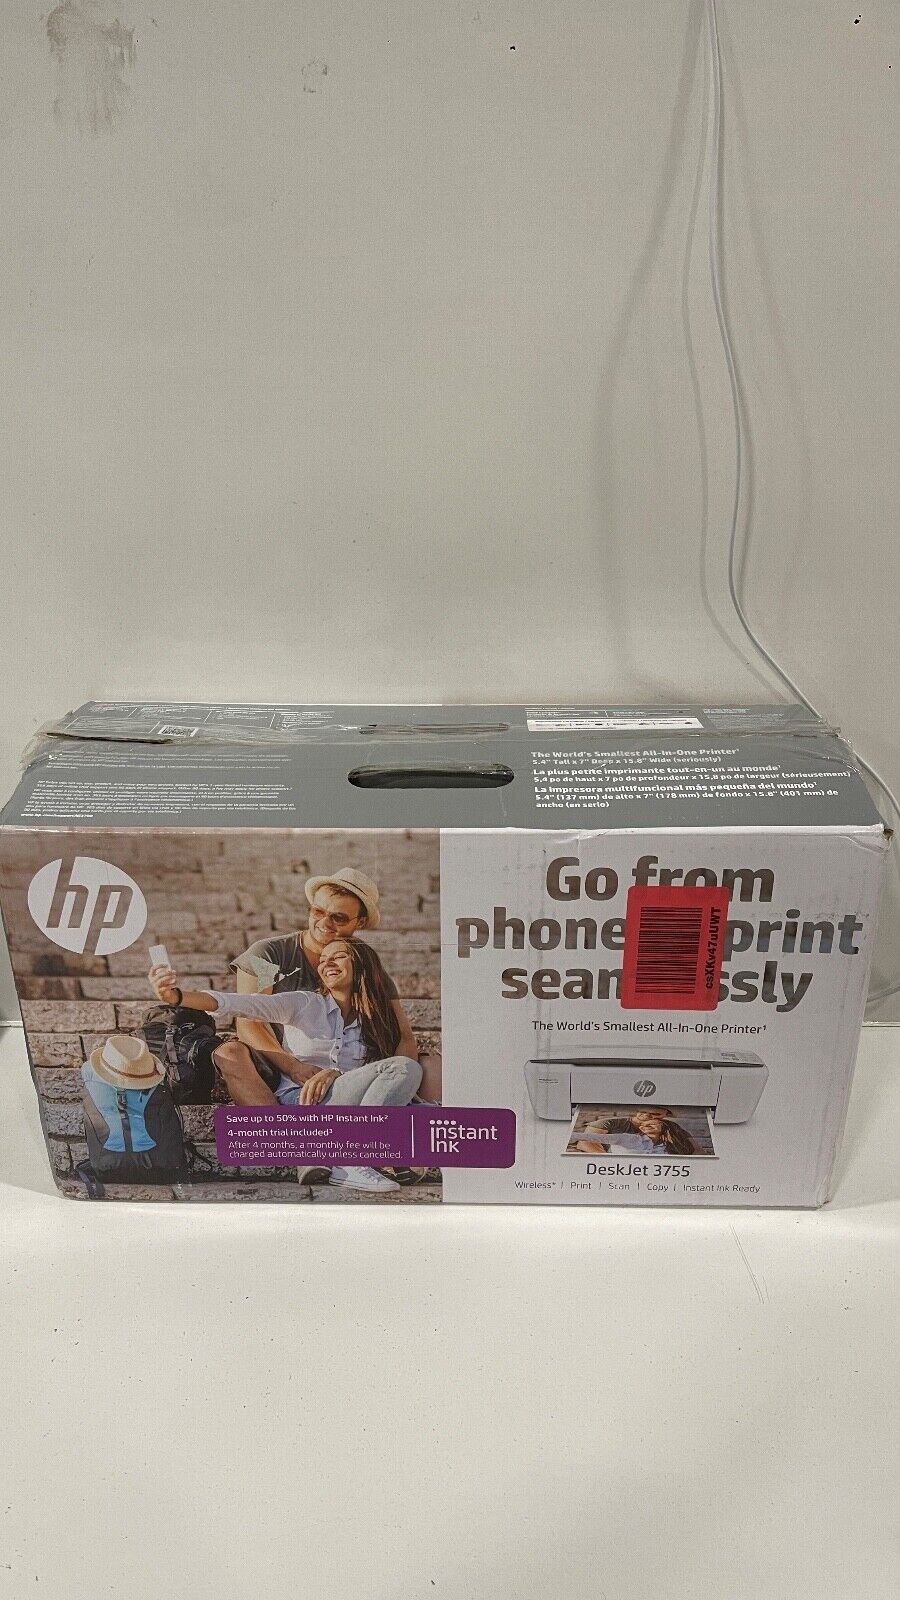 HP Deskjet 3755 Compact All-in-one Wireless Printer With Mobile Printing